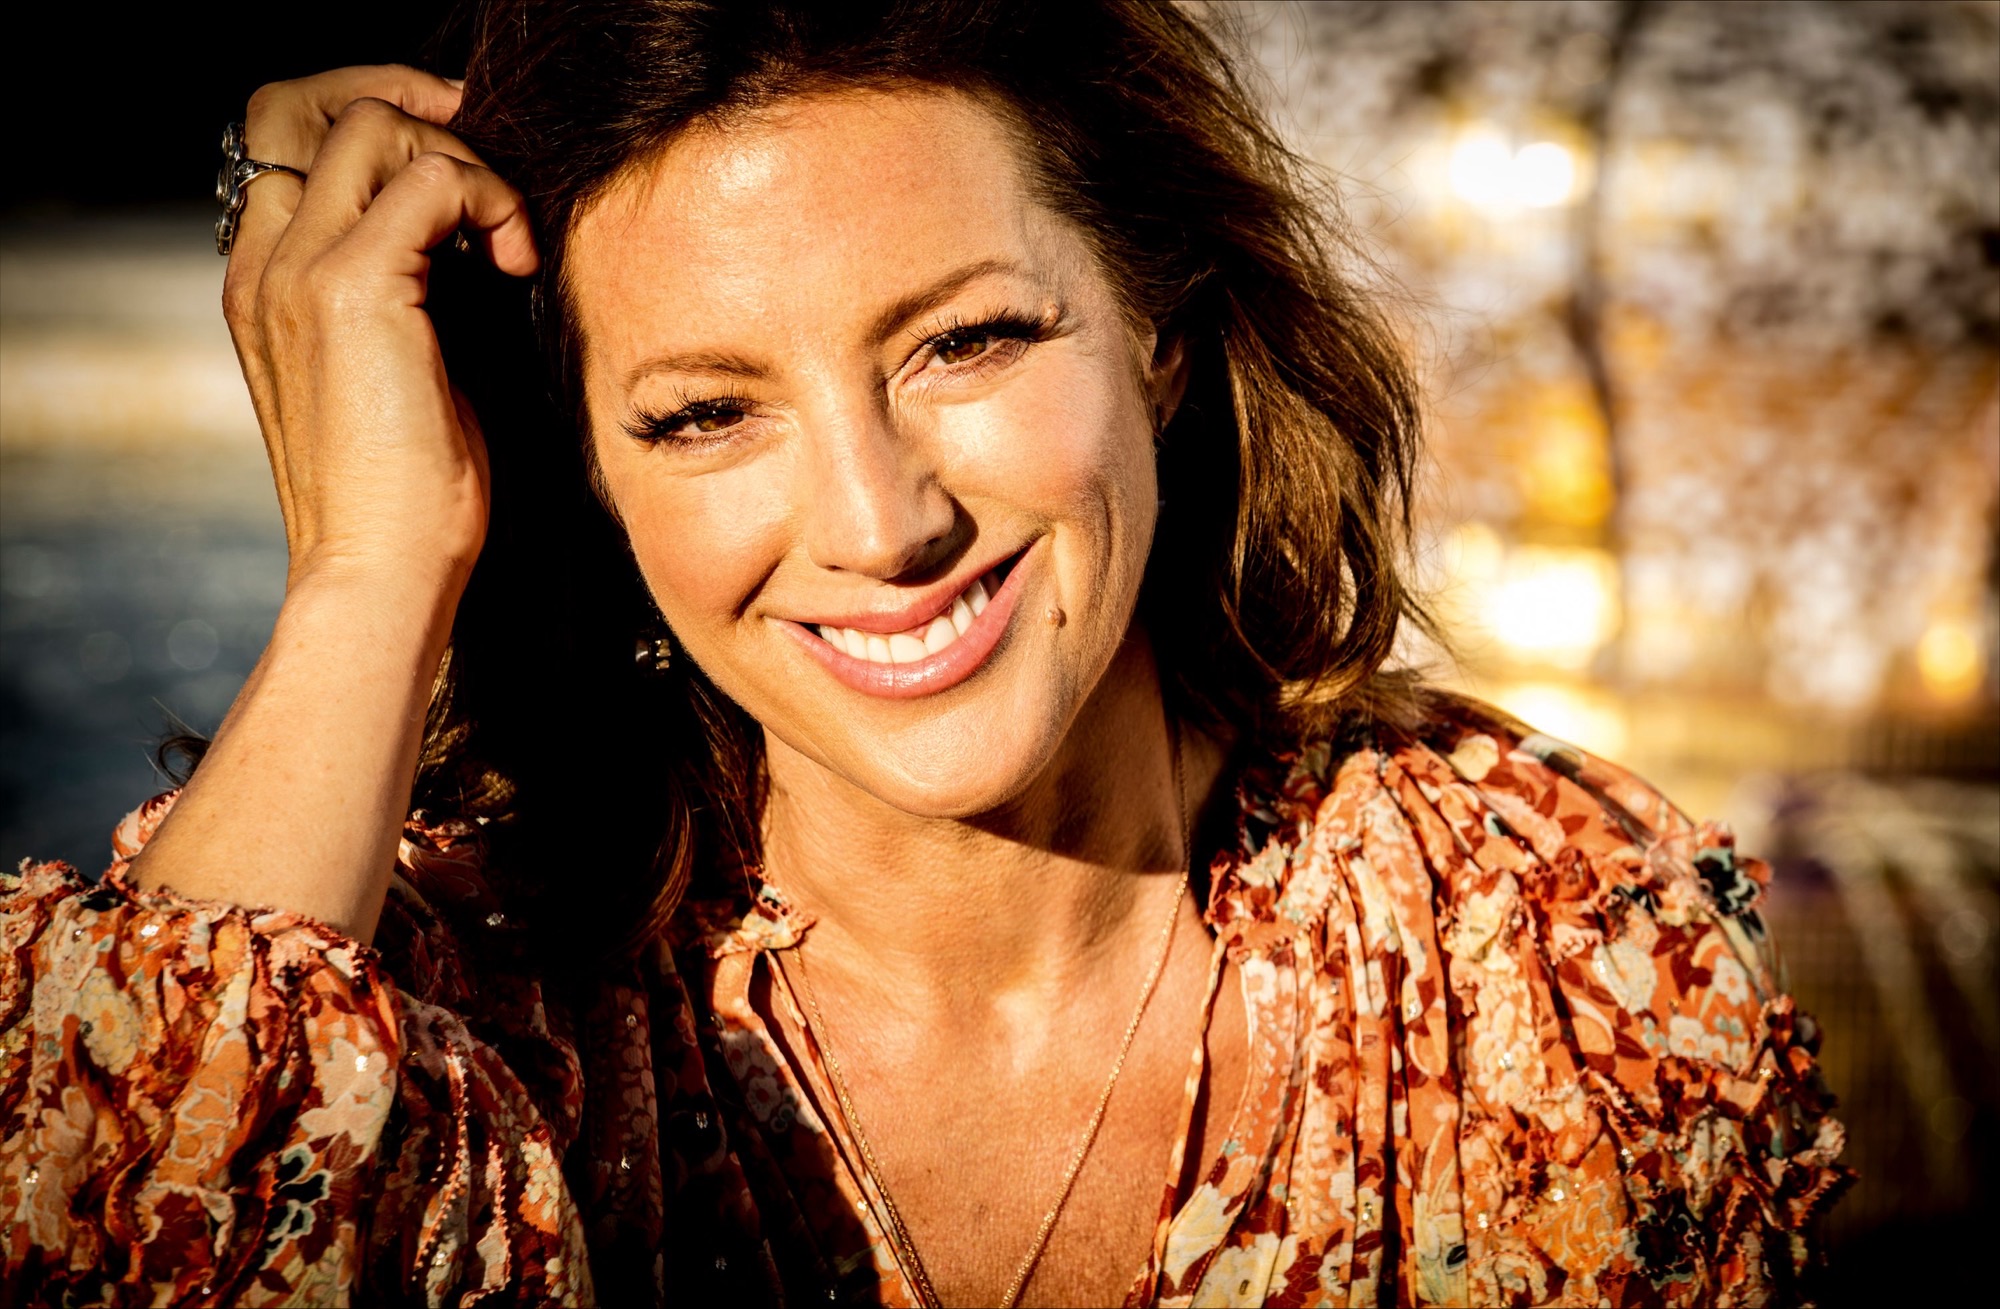 Sarah McLachlan: “Our North Star Always Will Be Putting the Kids First.”